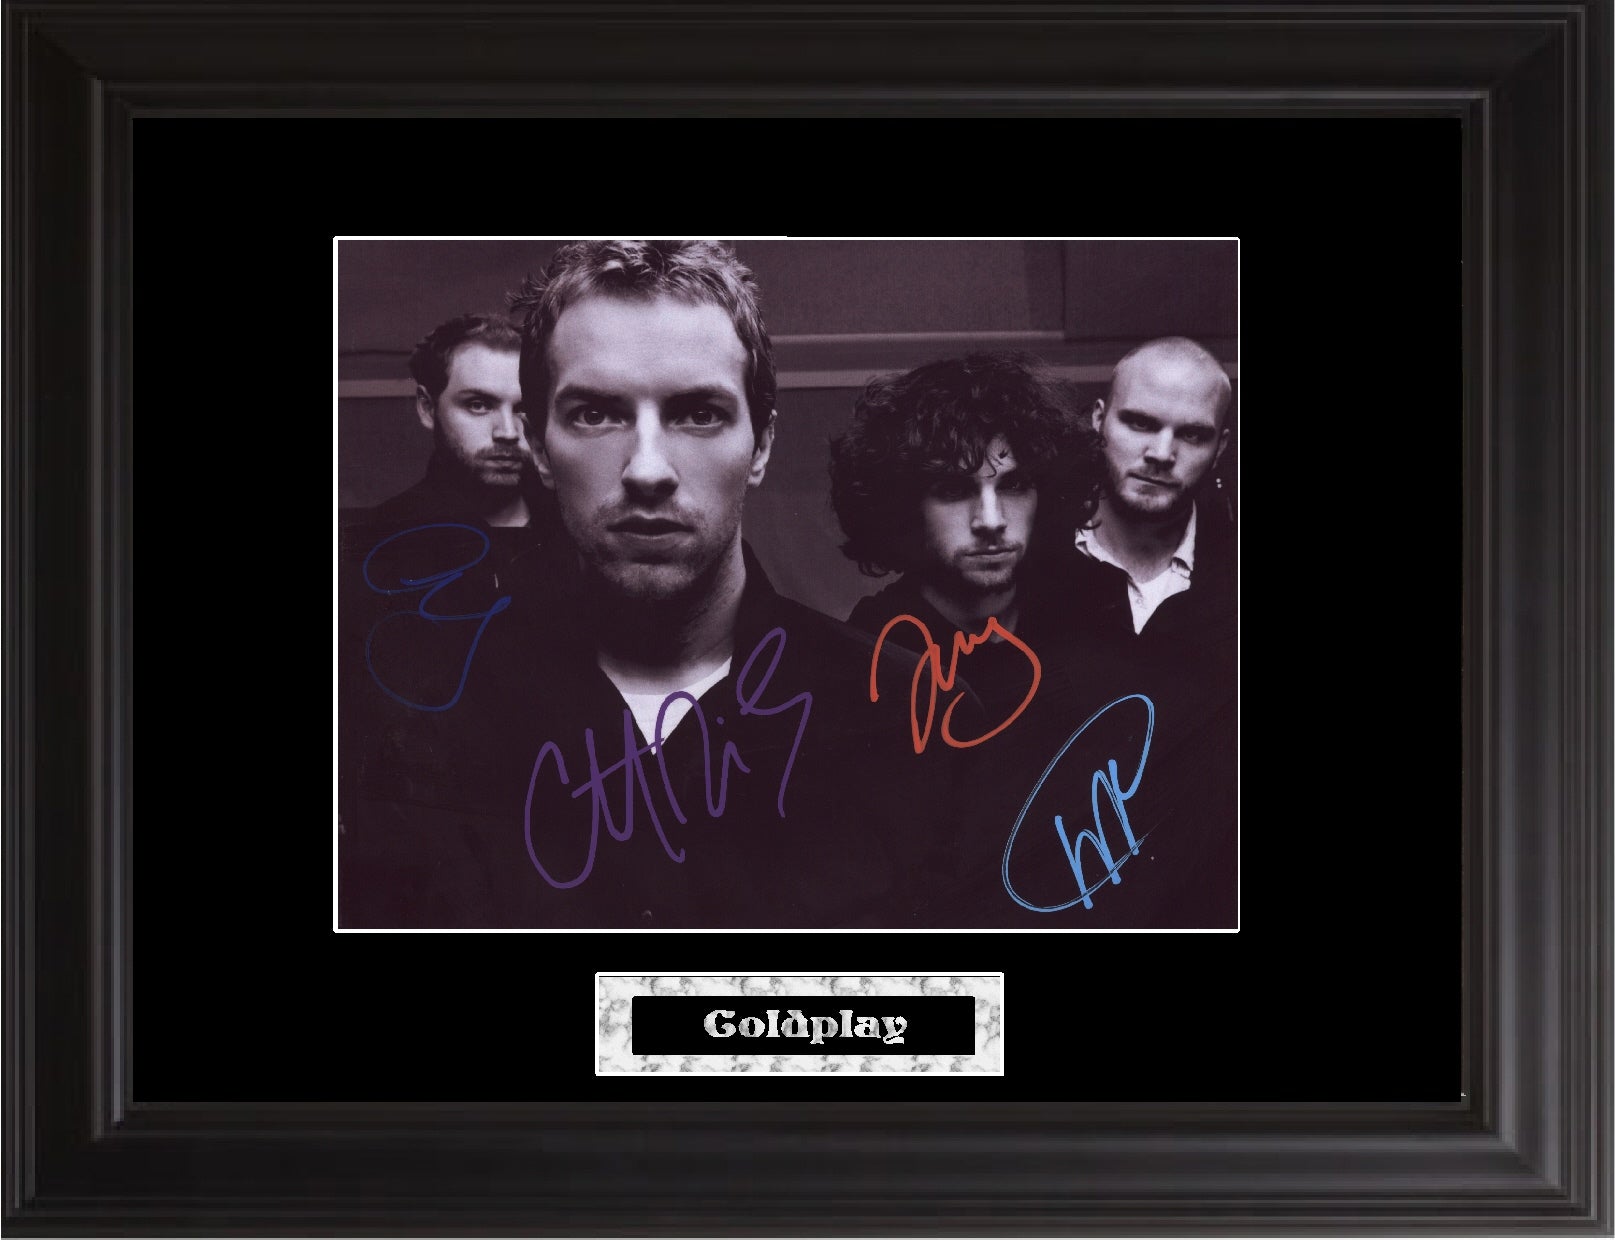 Coldplay Autographed Photo